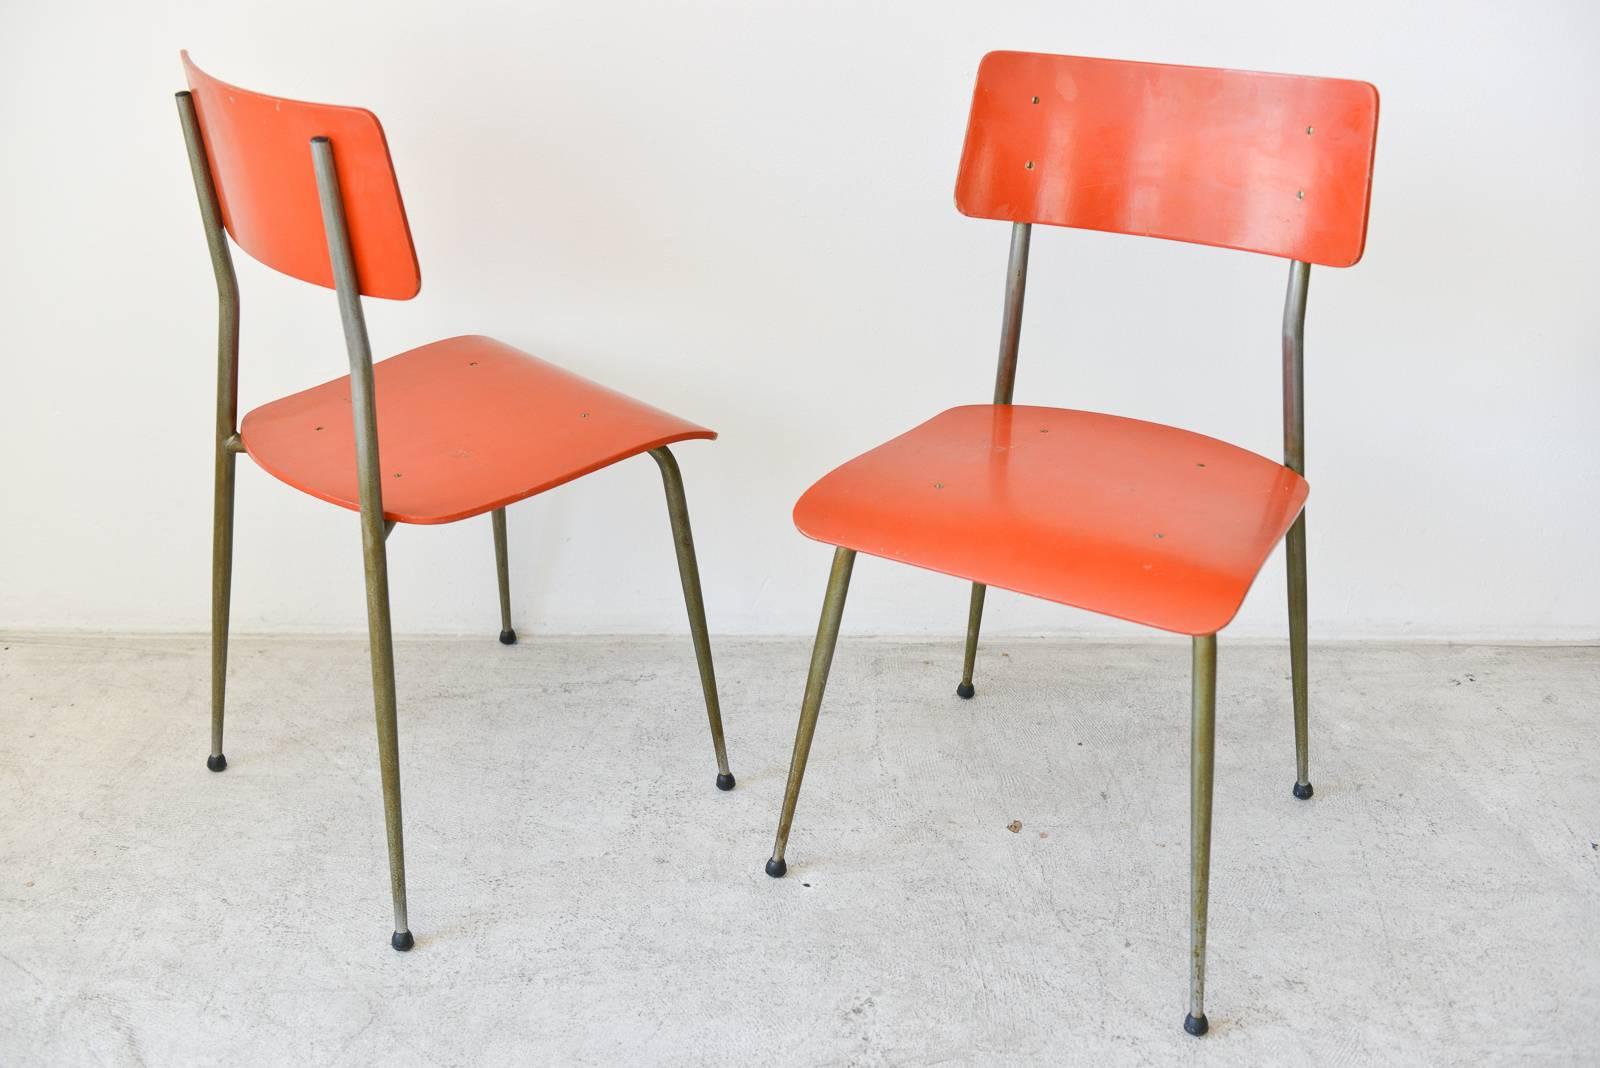 Vintage French child's table and chair set, circa 1950. Original dark orange enamel finish with great patina on legs. Very good condition, some small chips in paint on table, as shown in photo 10, otherwise very good.

Table measures 30